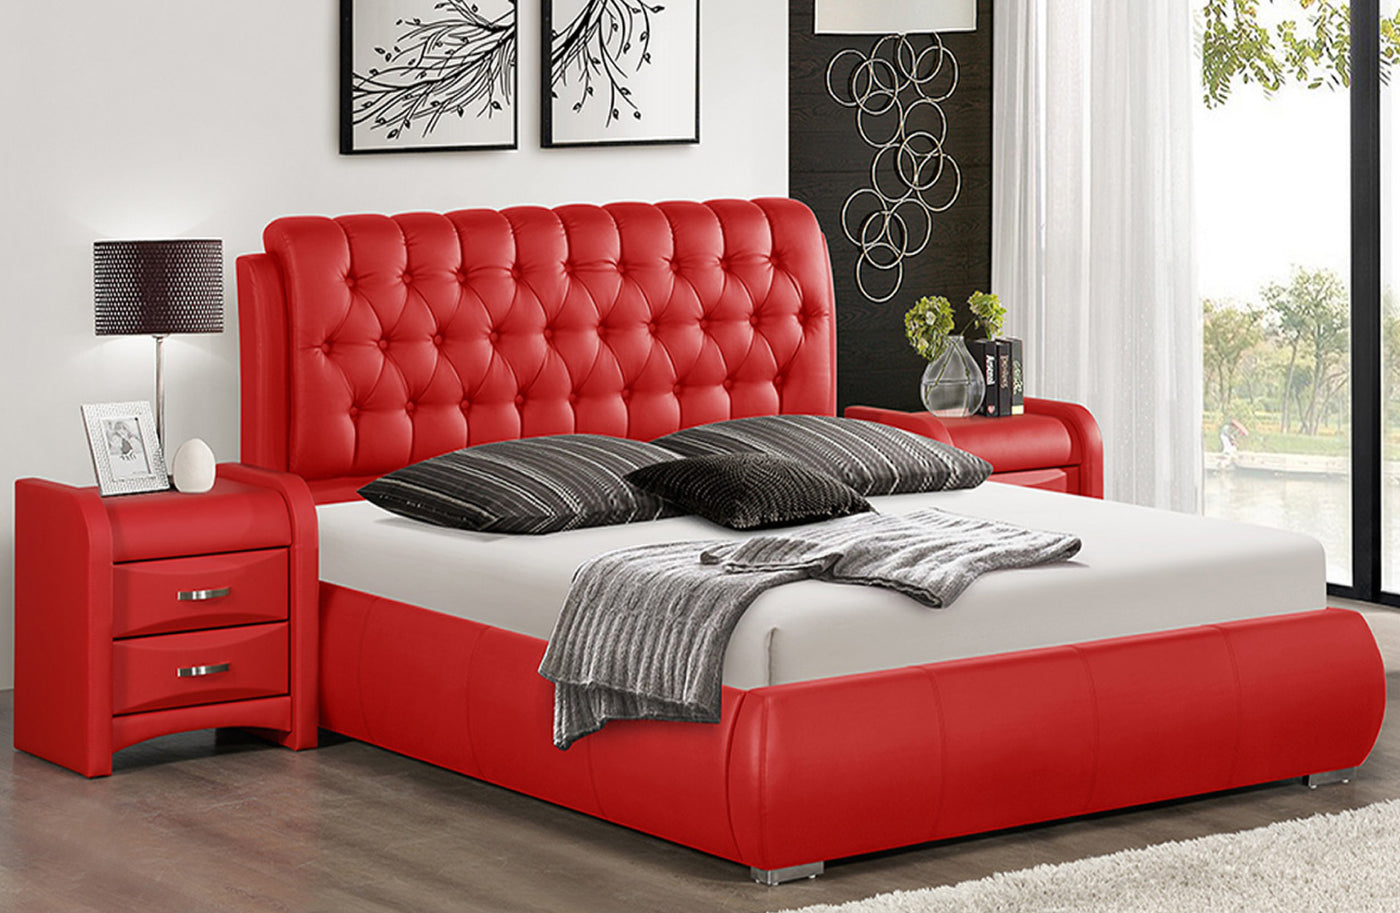 Grand Chateux Sleigh Bed